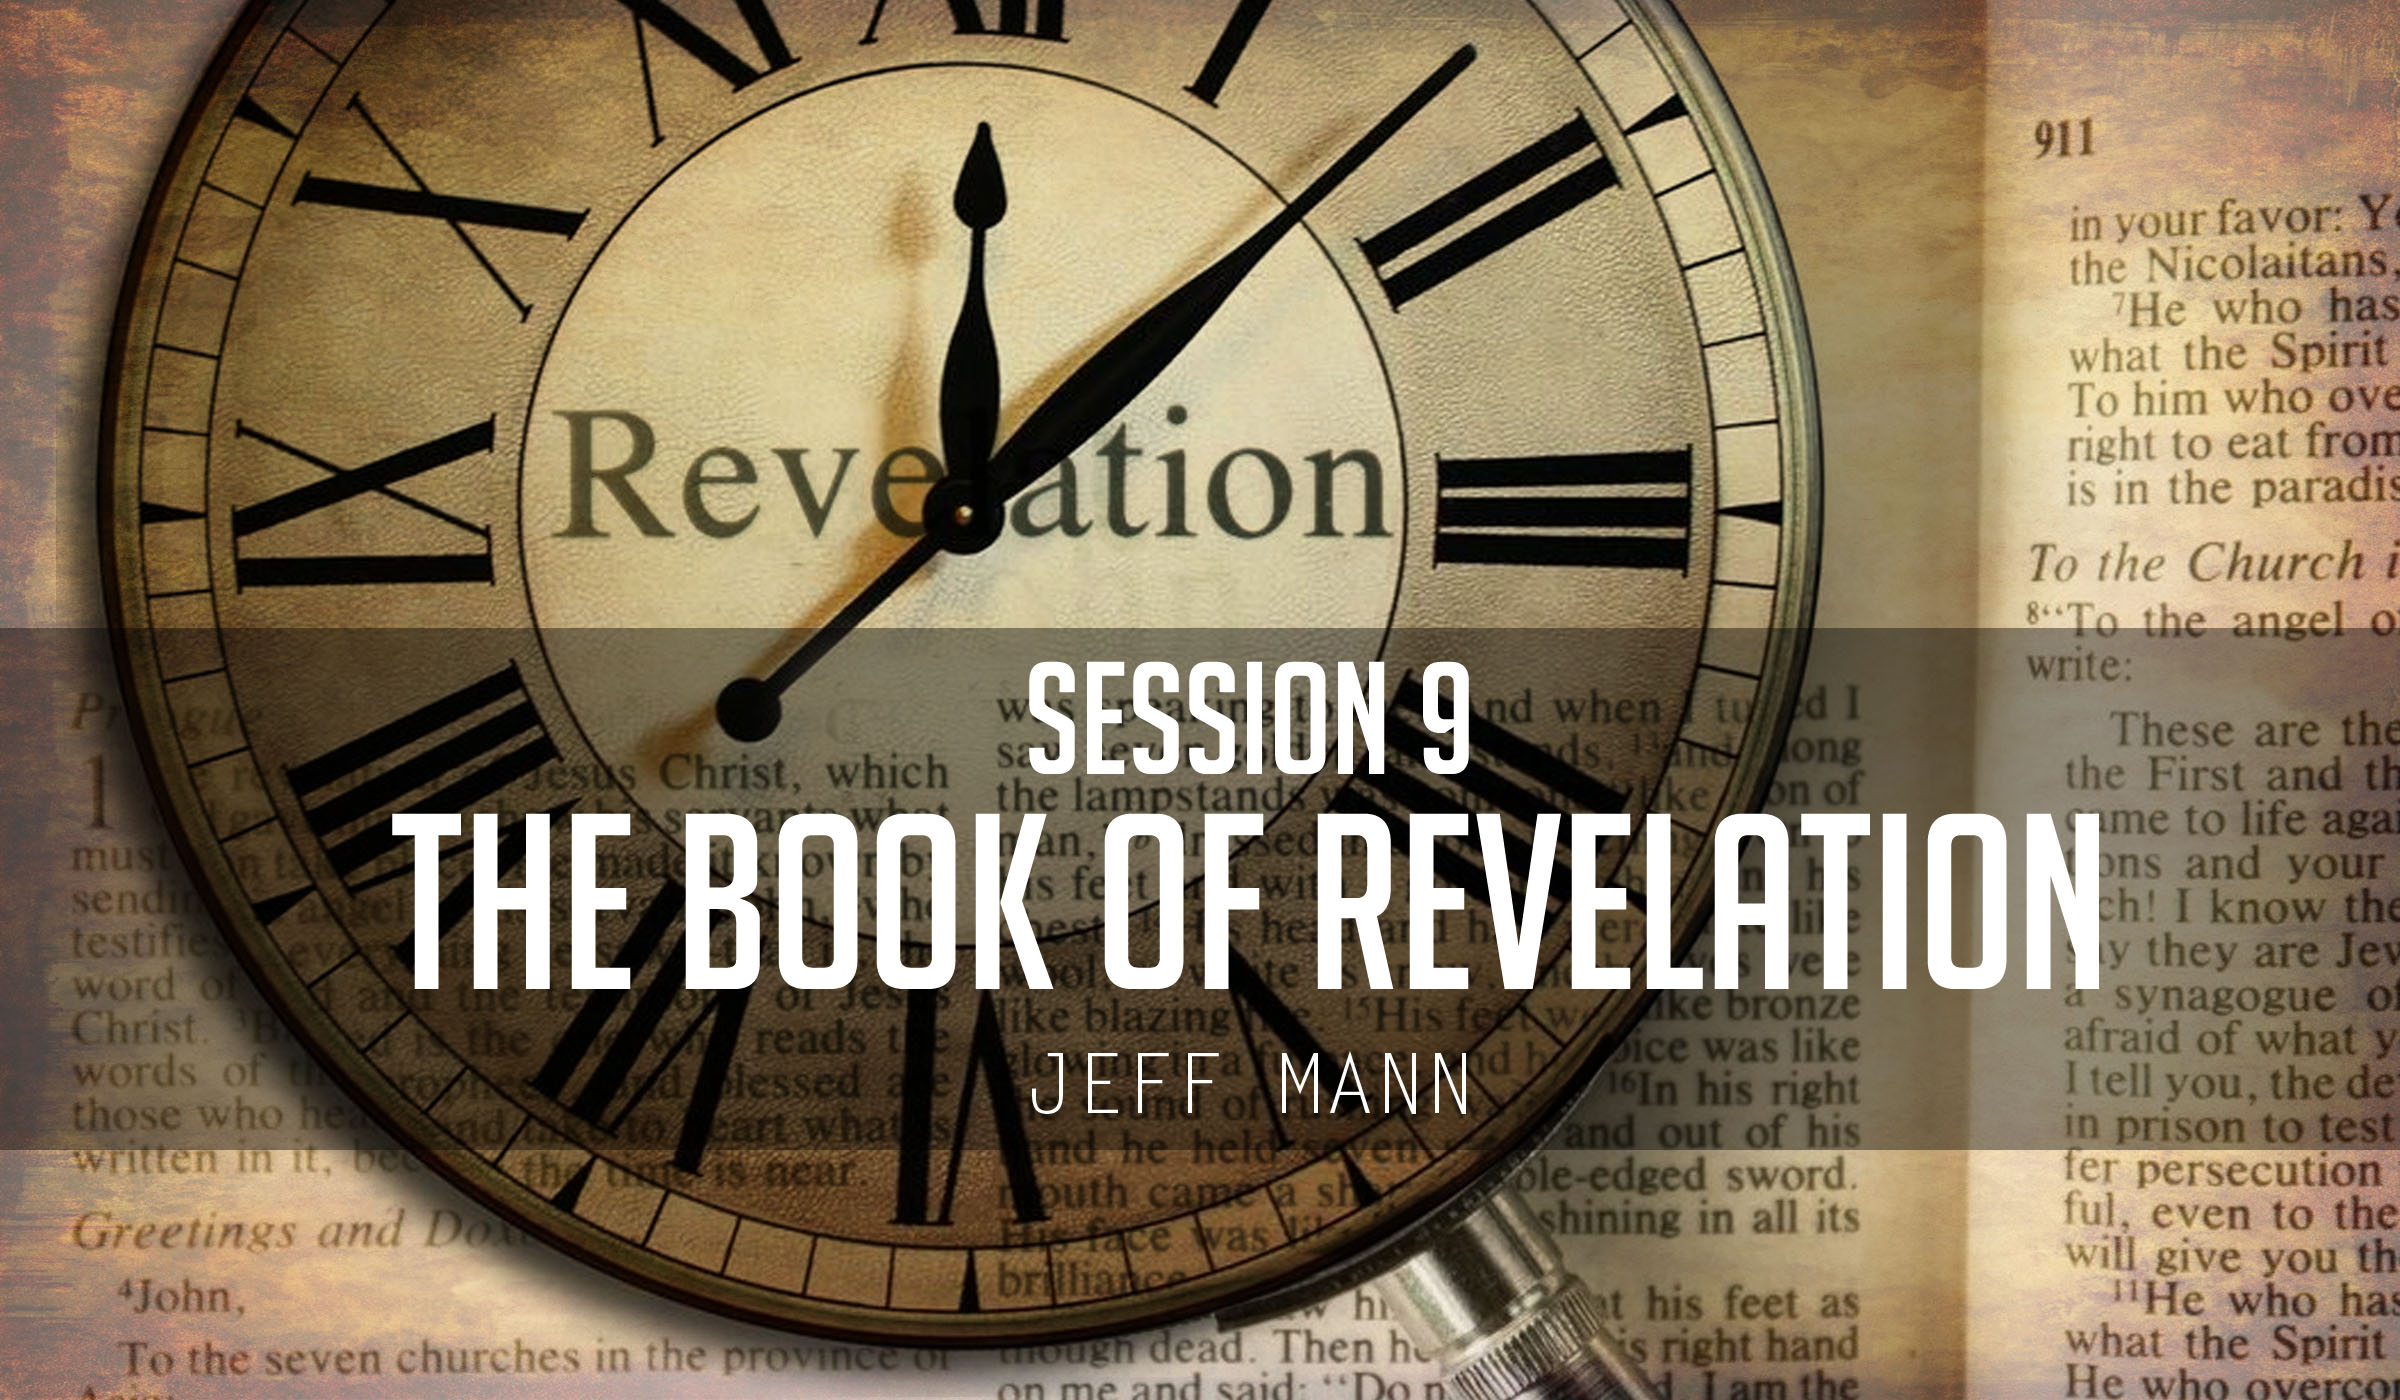 The Book of Revelation Session 9